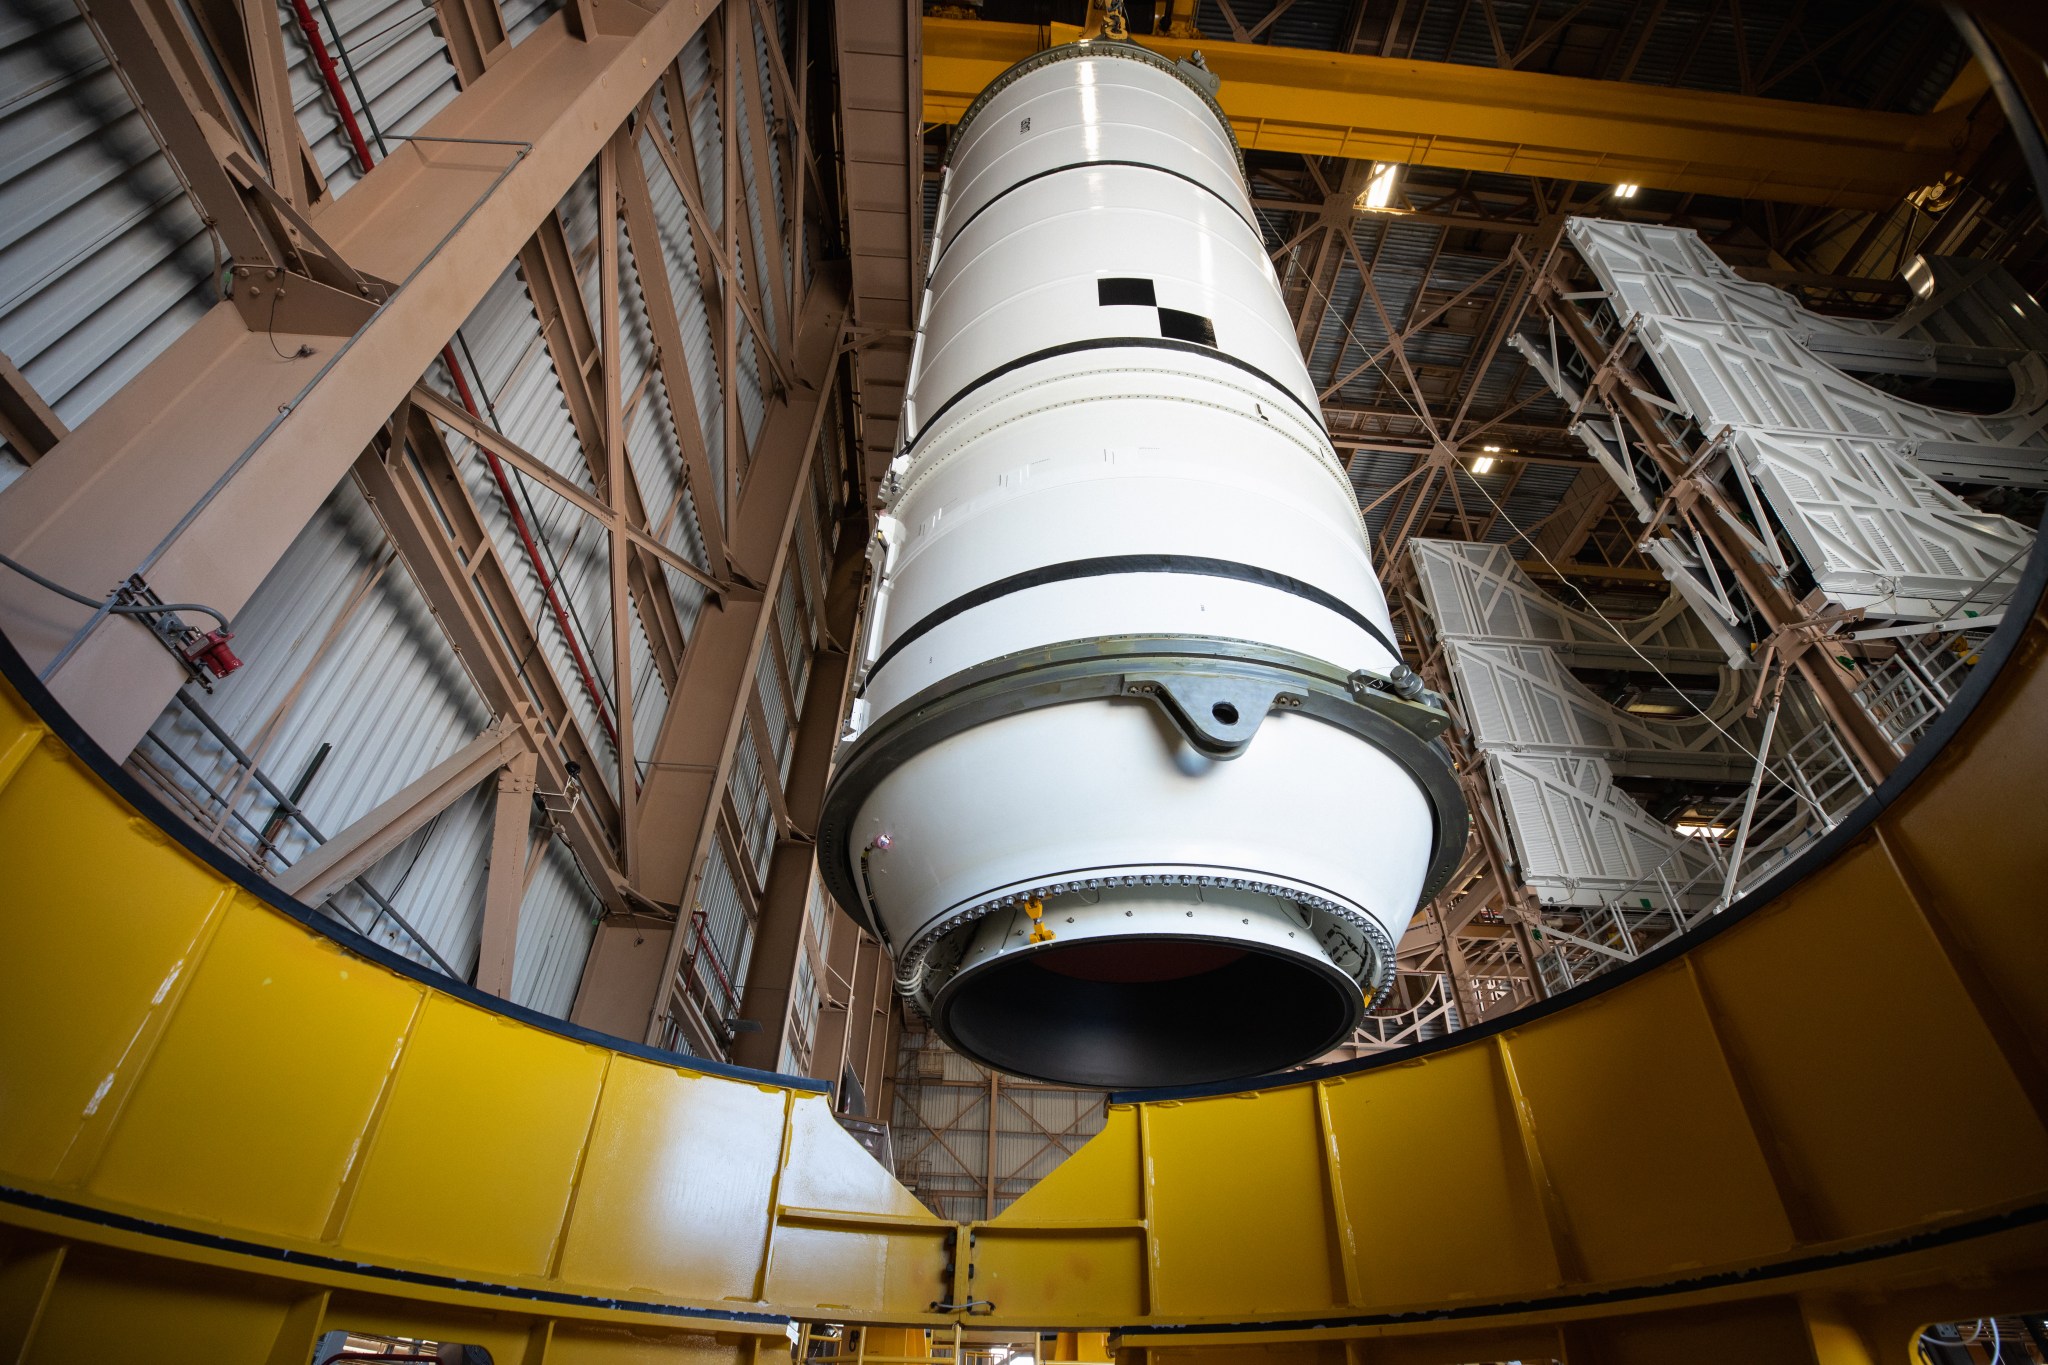 Technicians lift the right aft motor segment – one of five segments that make up one of two solid rocket boosters for the agency